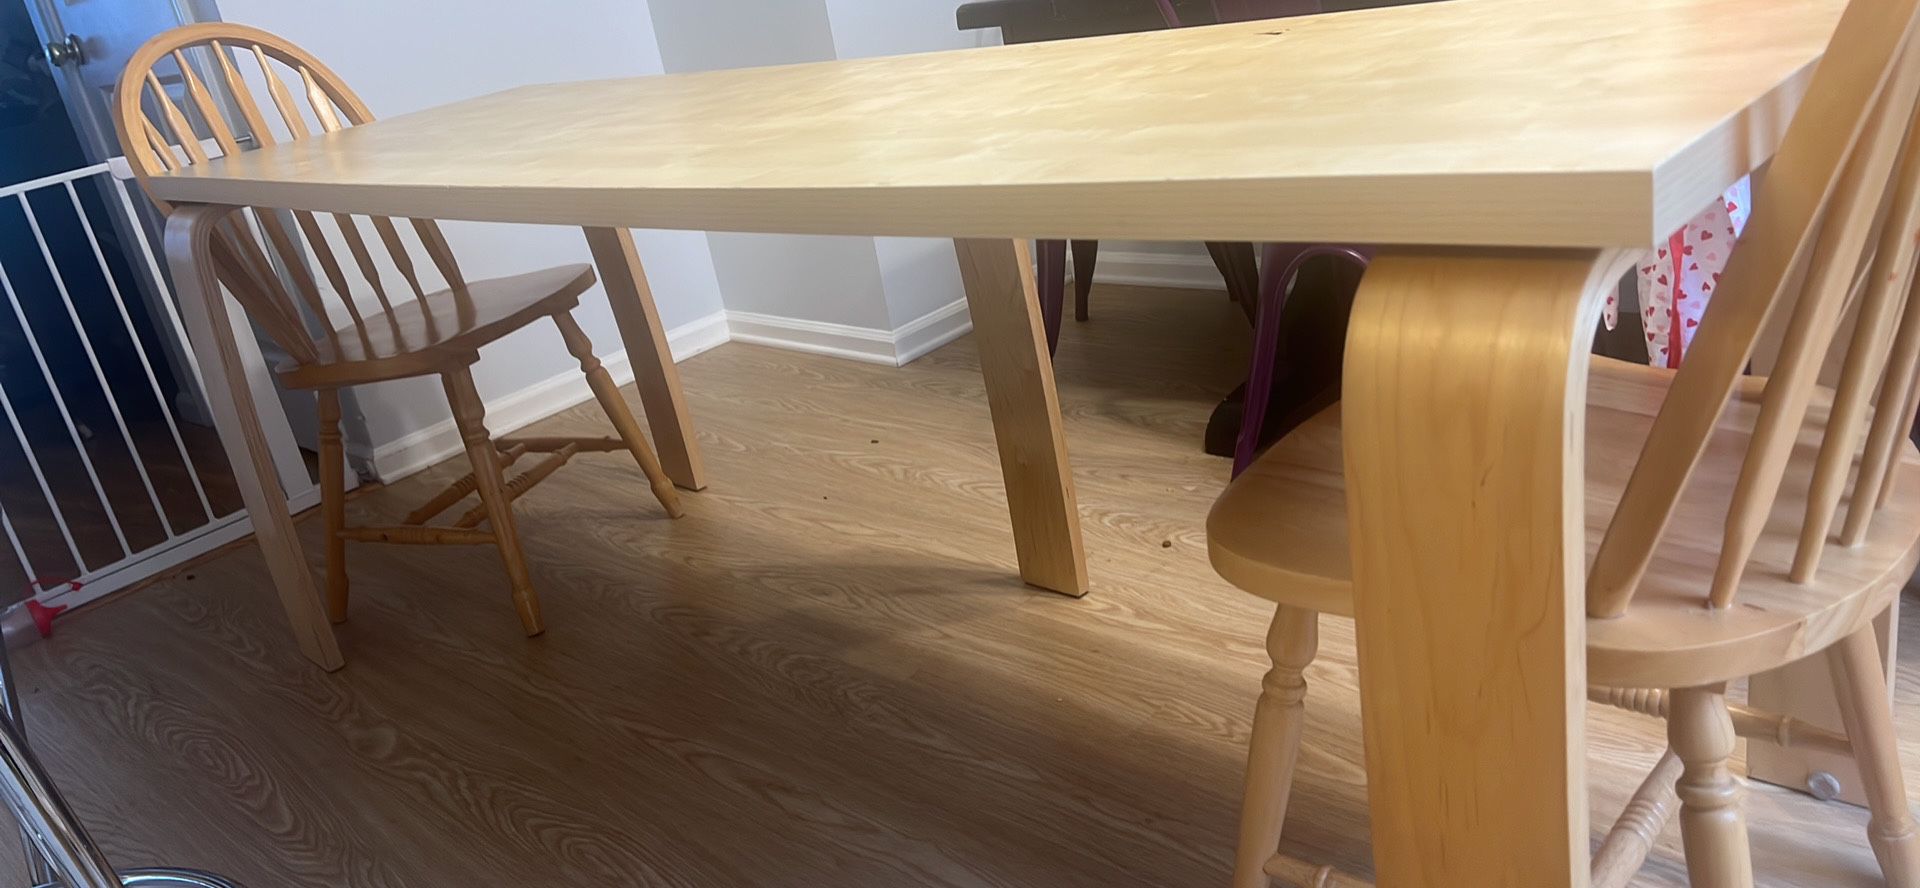 Long Wooden Kitchen Table 